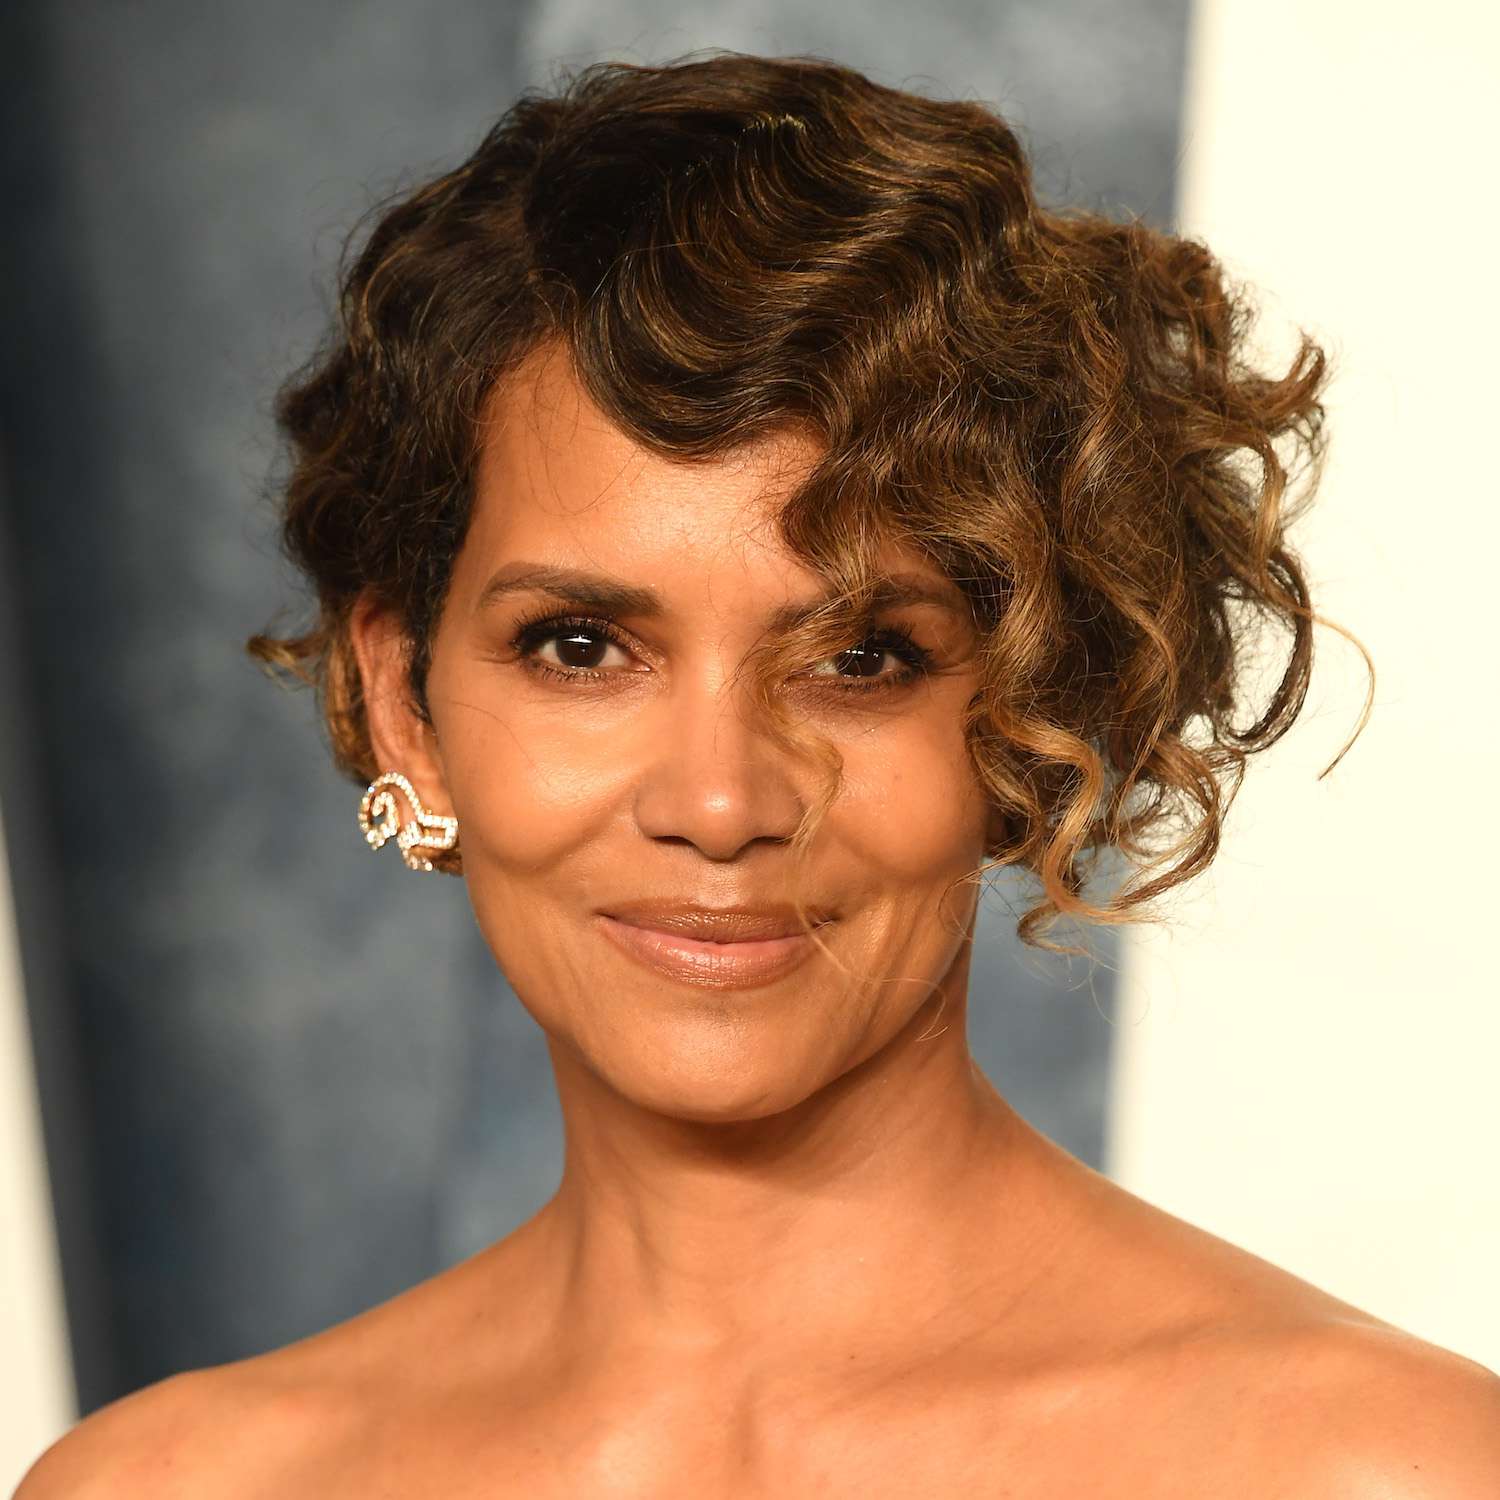 Halle Berry wears a curly updo hairstyle with face-framing finger waves